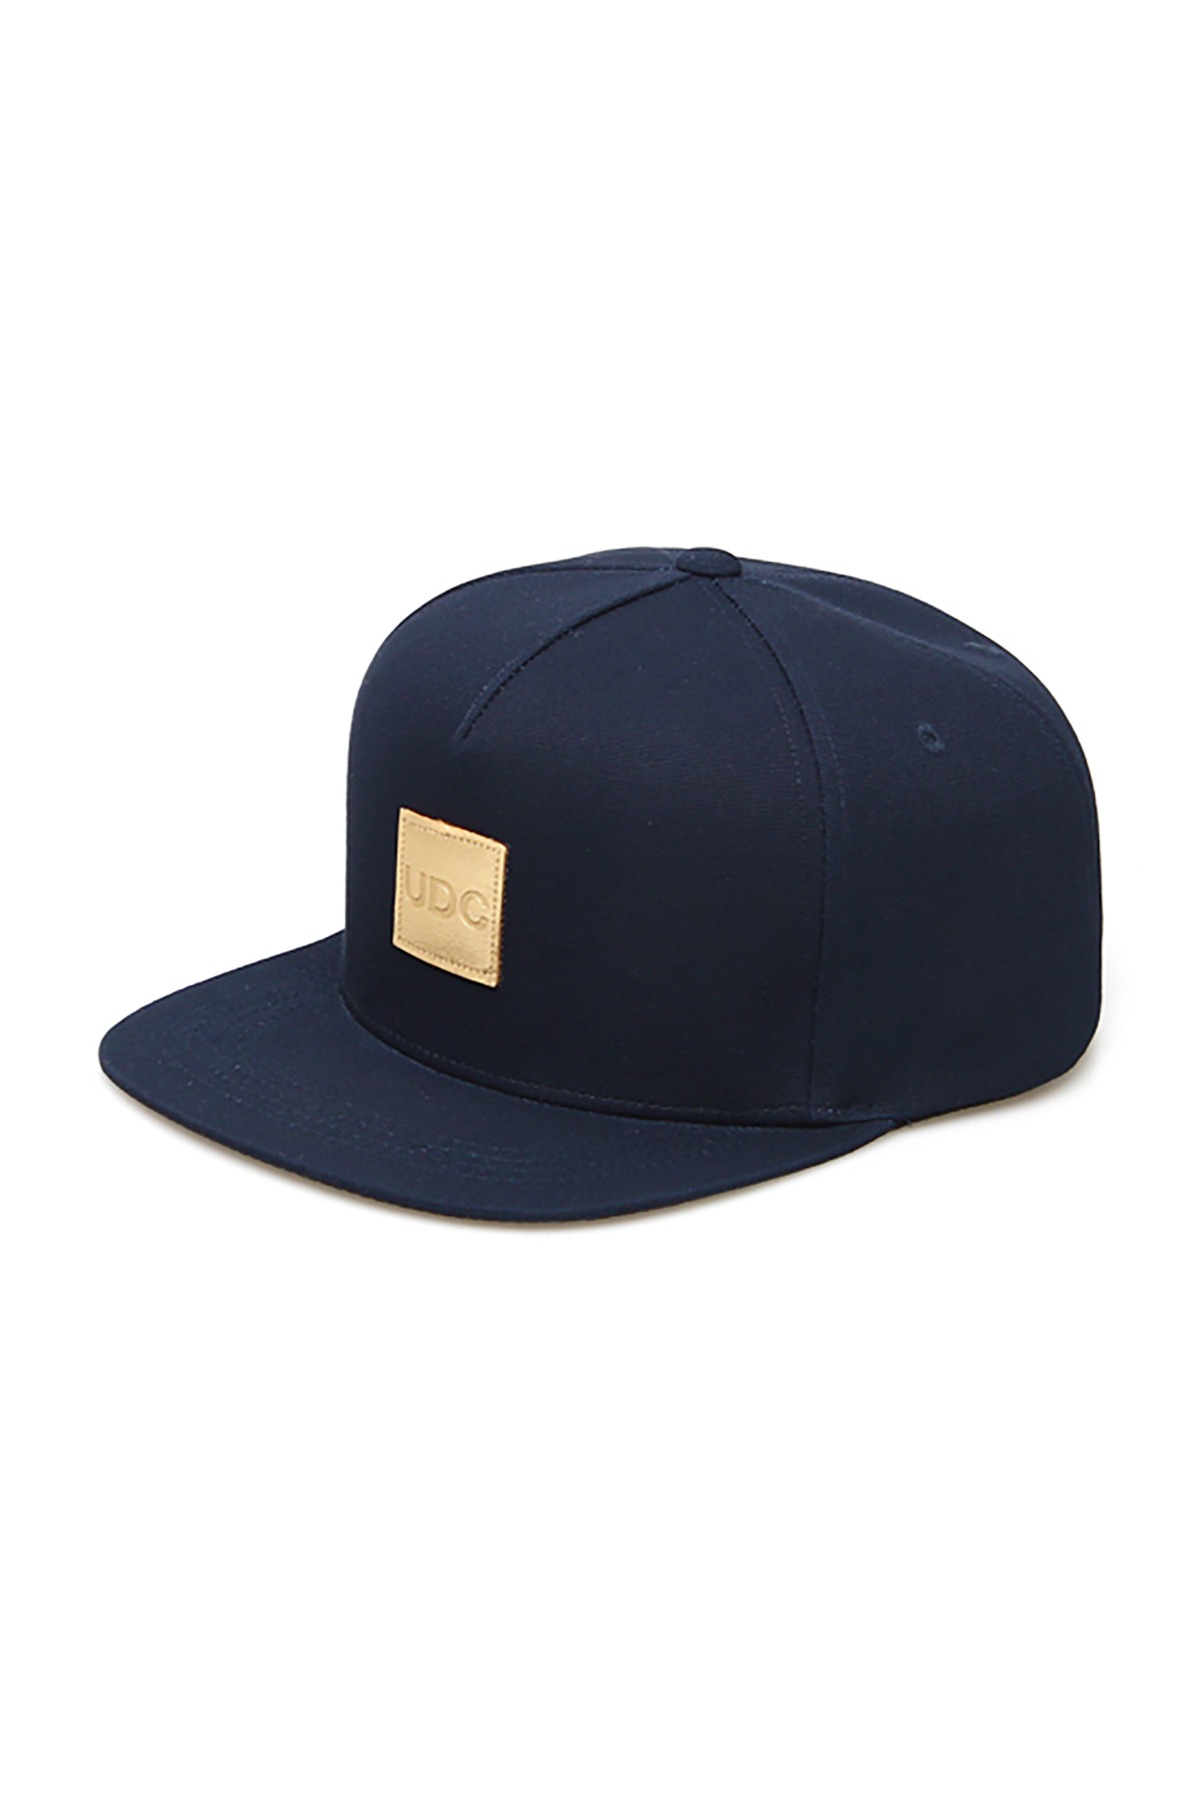 SQUARE GOLD LABEL / DEEP NAVY